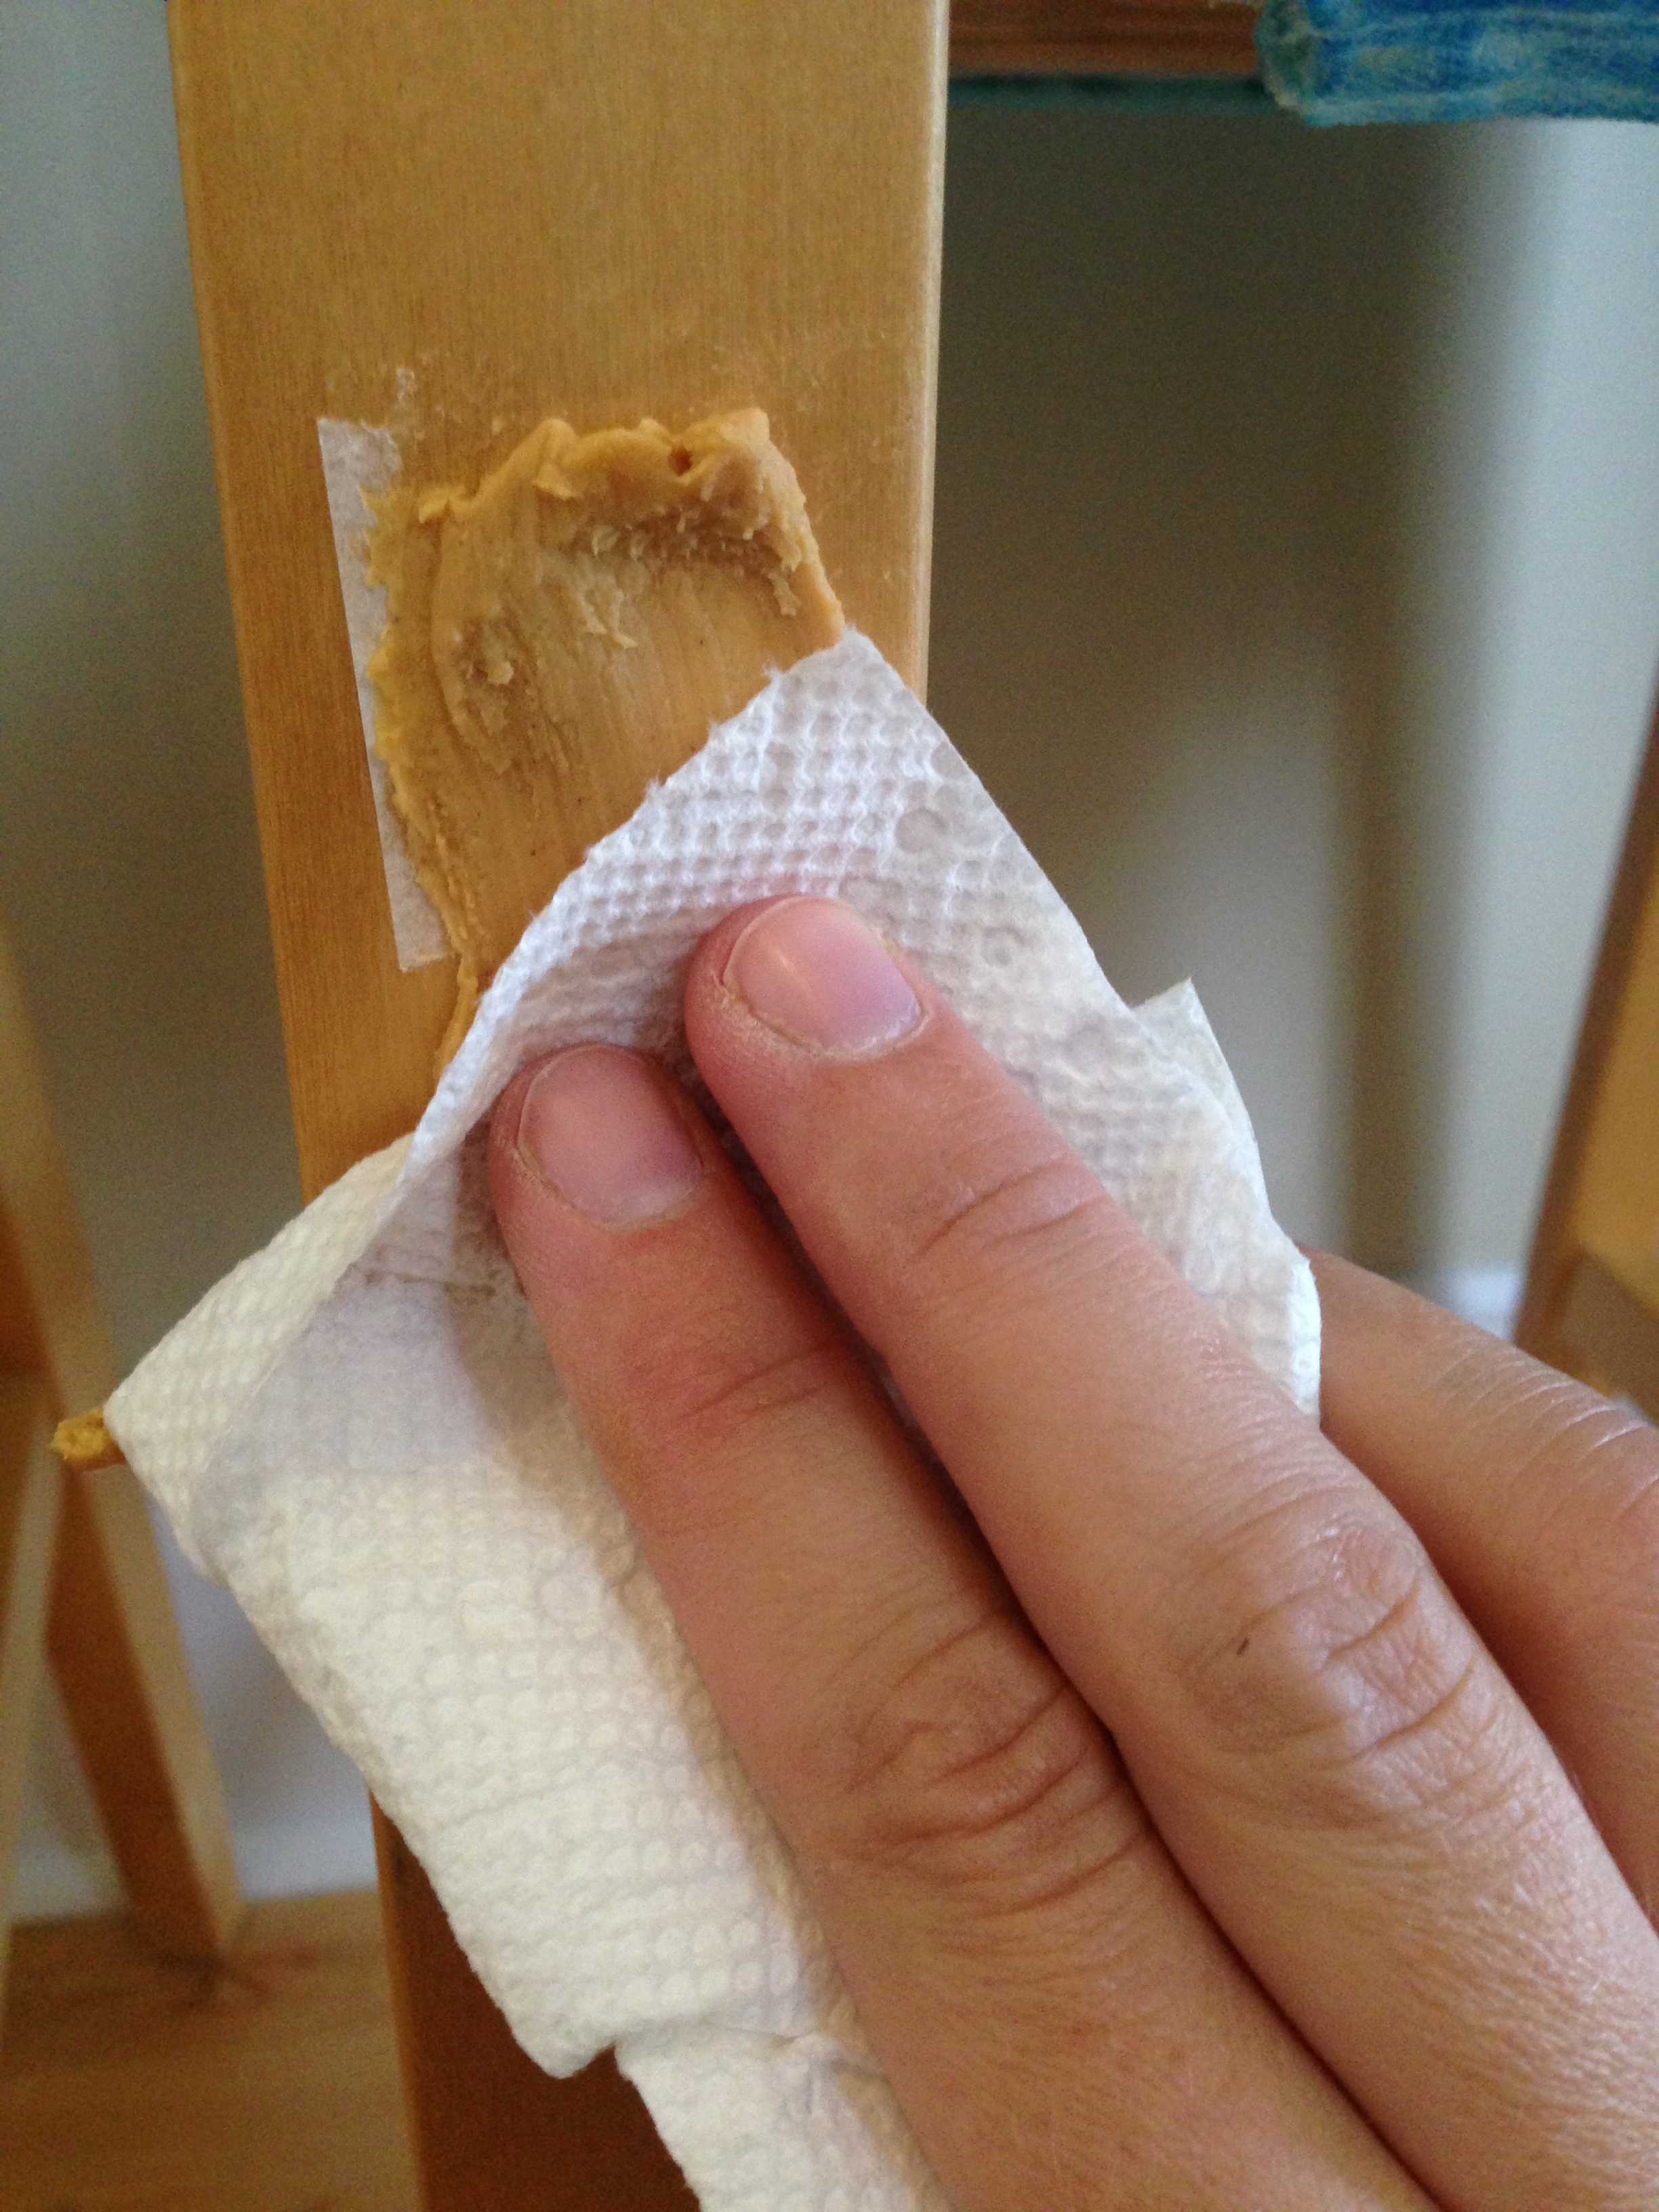 Removing sticker residue with peanut butter